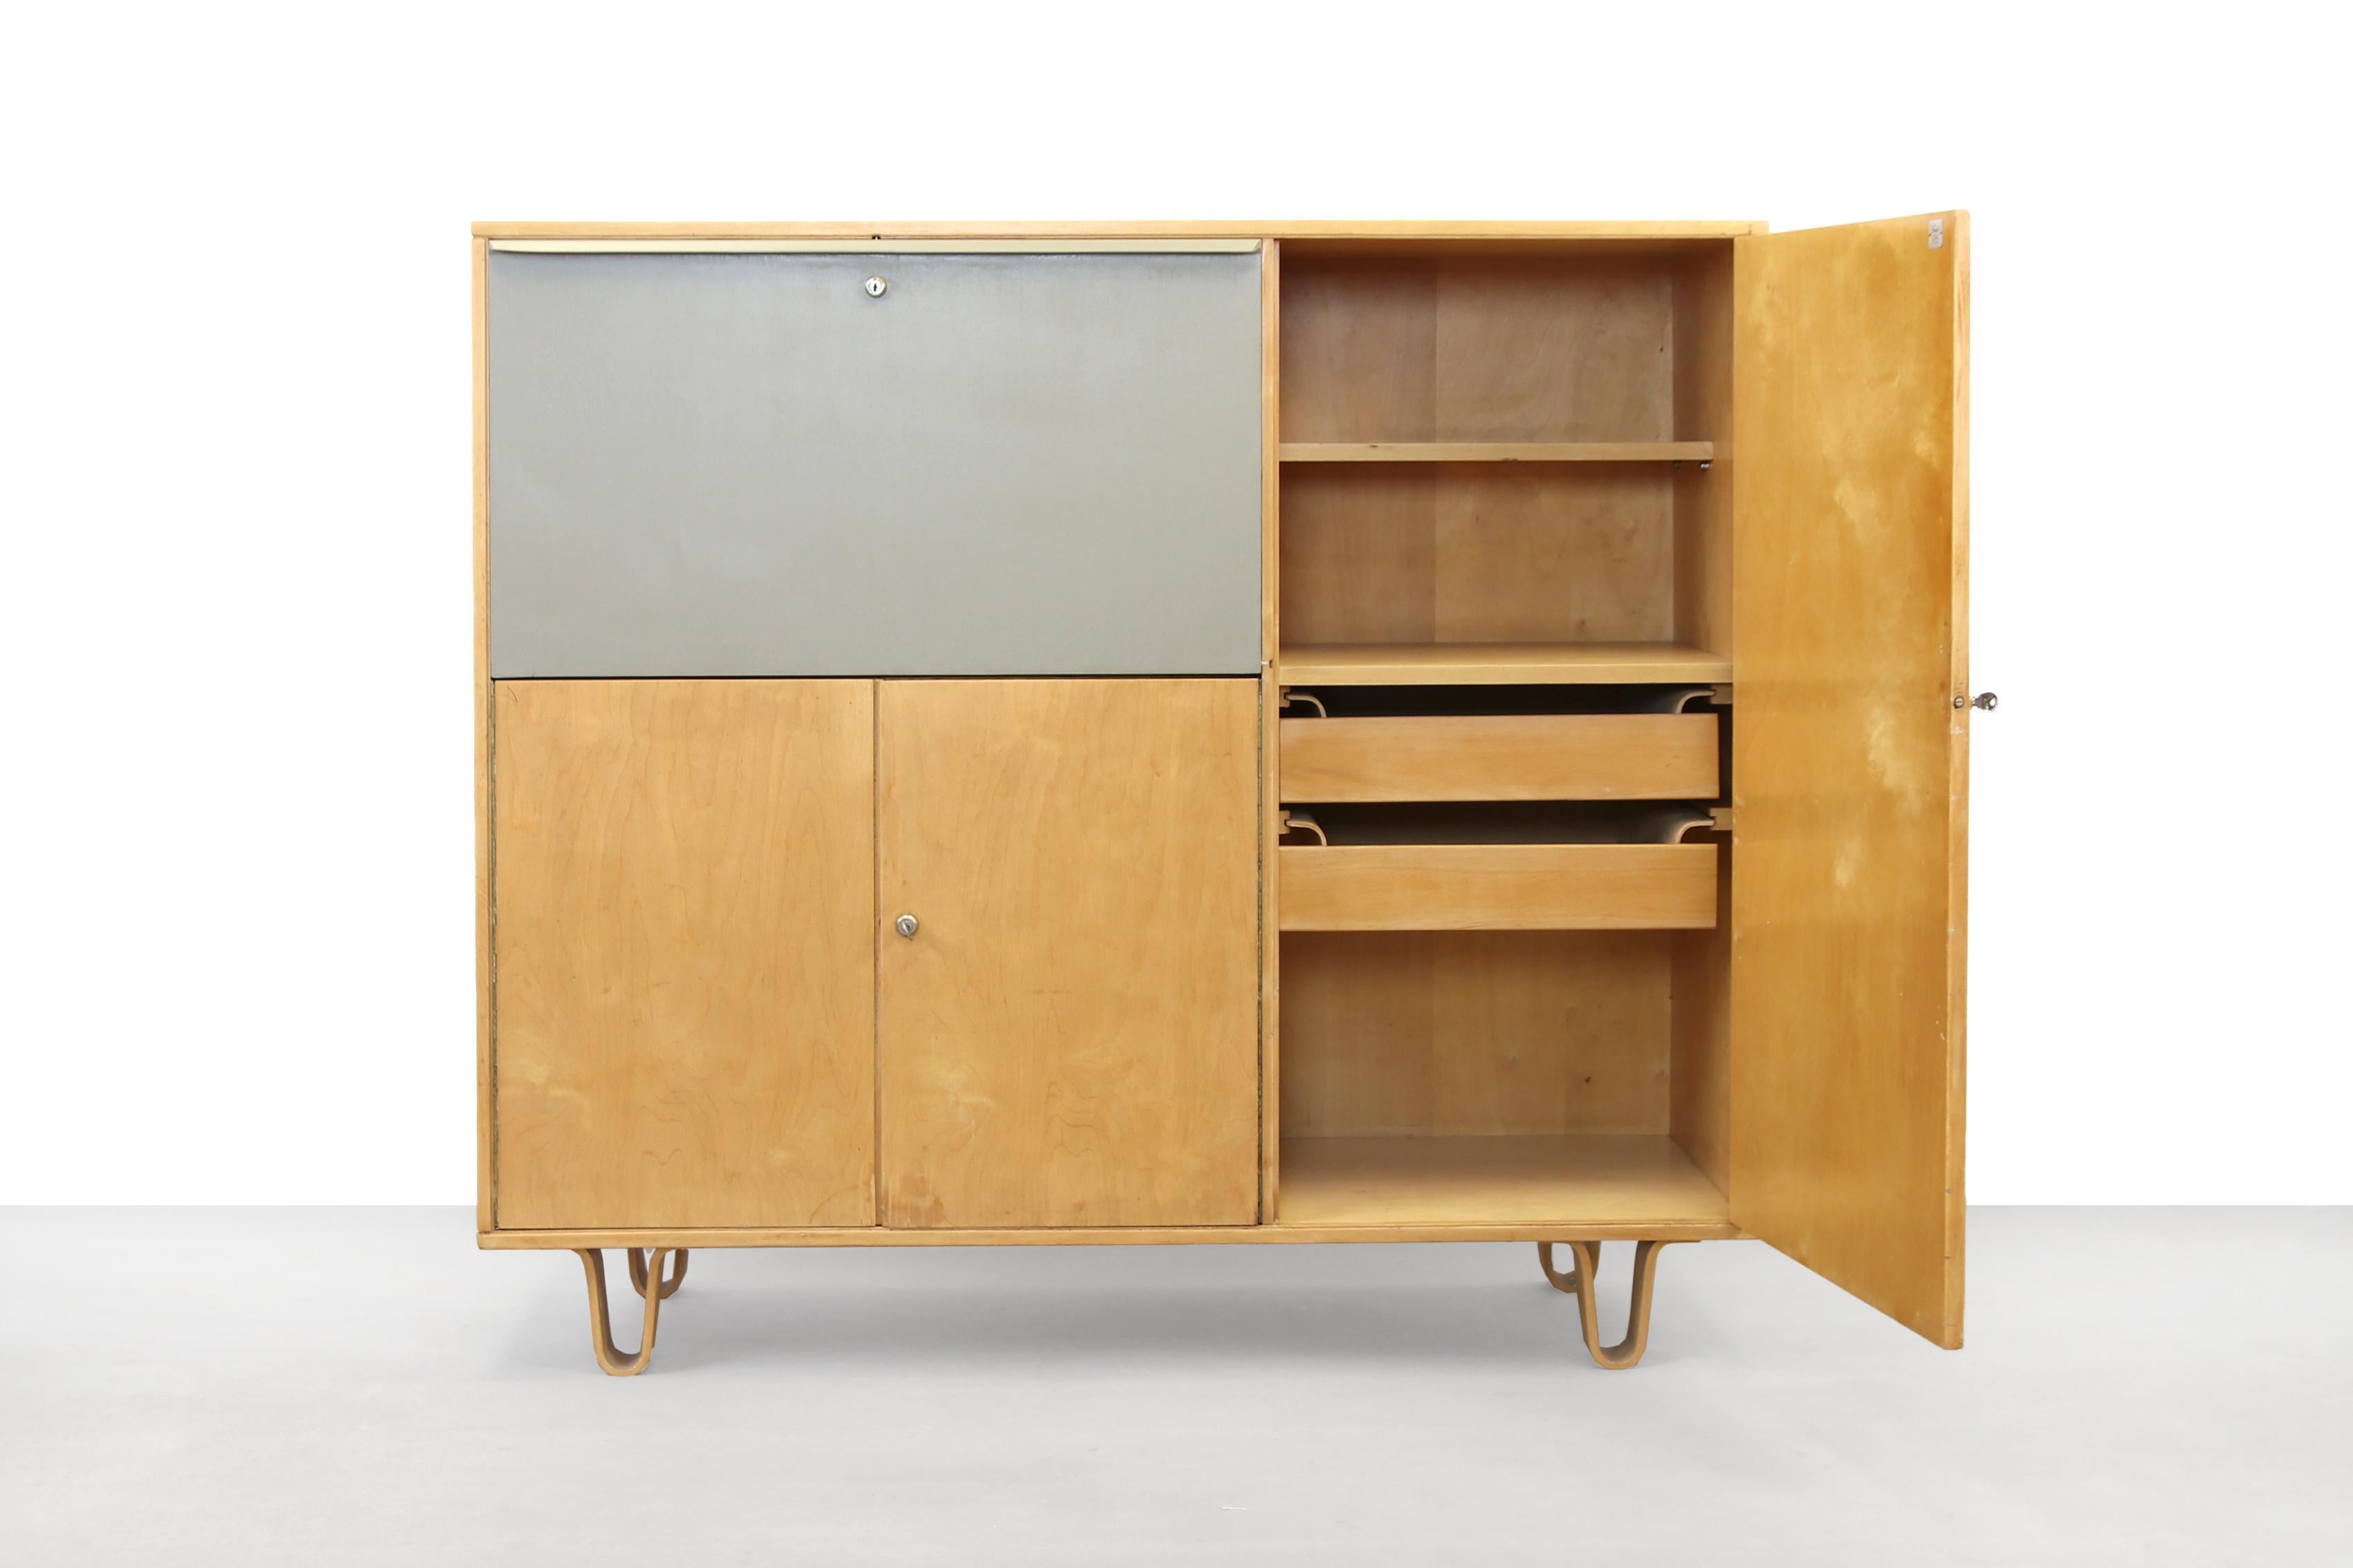 Very nice cabinet designed by Cees Braakman for Pastoe in the 1950s. This cabinet is part of the so-called birch series. The birch series is characterized by the beautifully curved birch legs, or the curved plywood drawers and of course that they